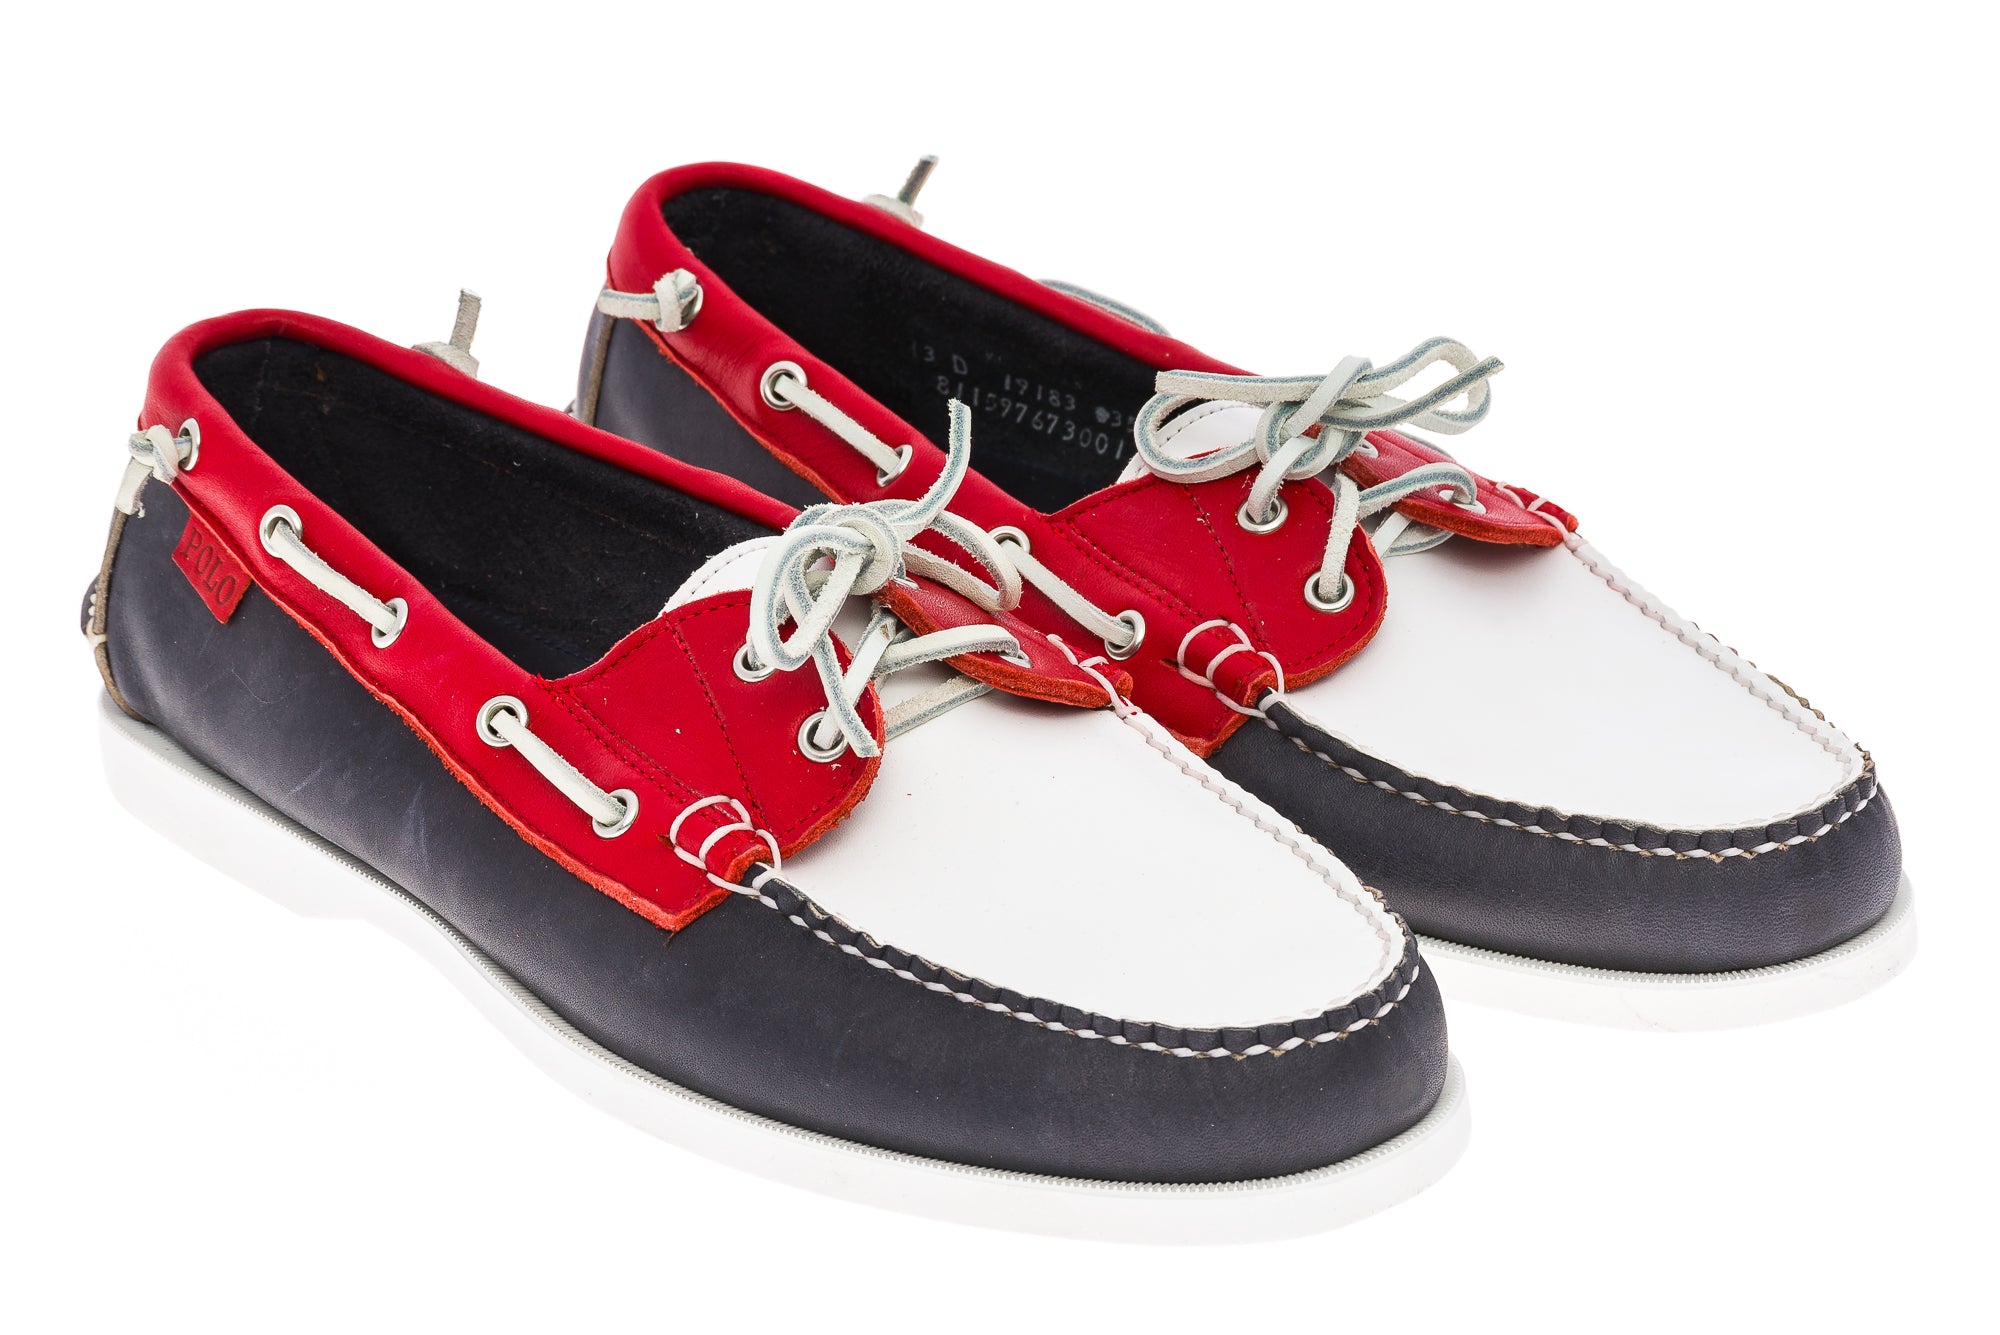 Polo Ralph Lauren Olympic Opening Ceremony Boat Shoes Mens 13D Red/White/Blue drive side